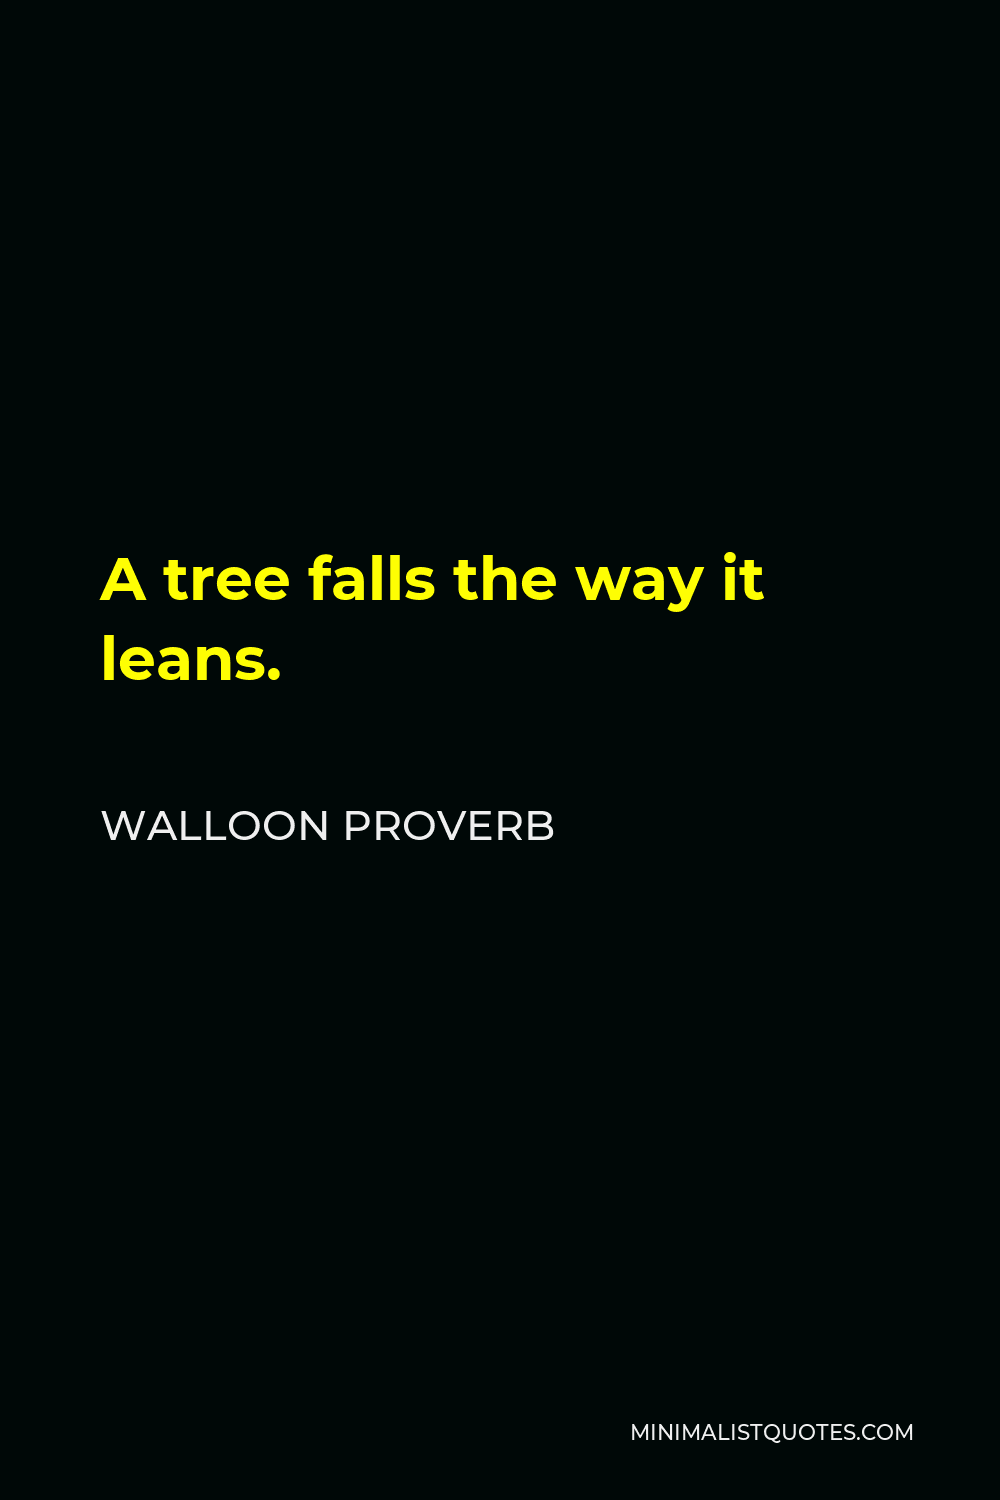 Walloon Proverb Quote - A tree falls the way it leans.